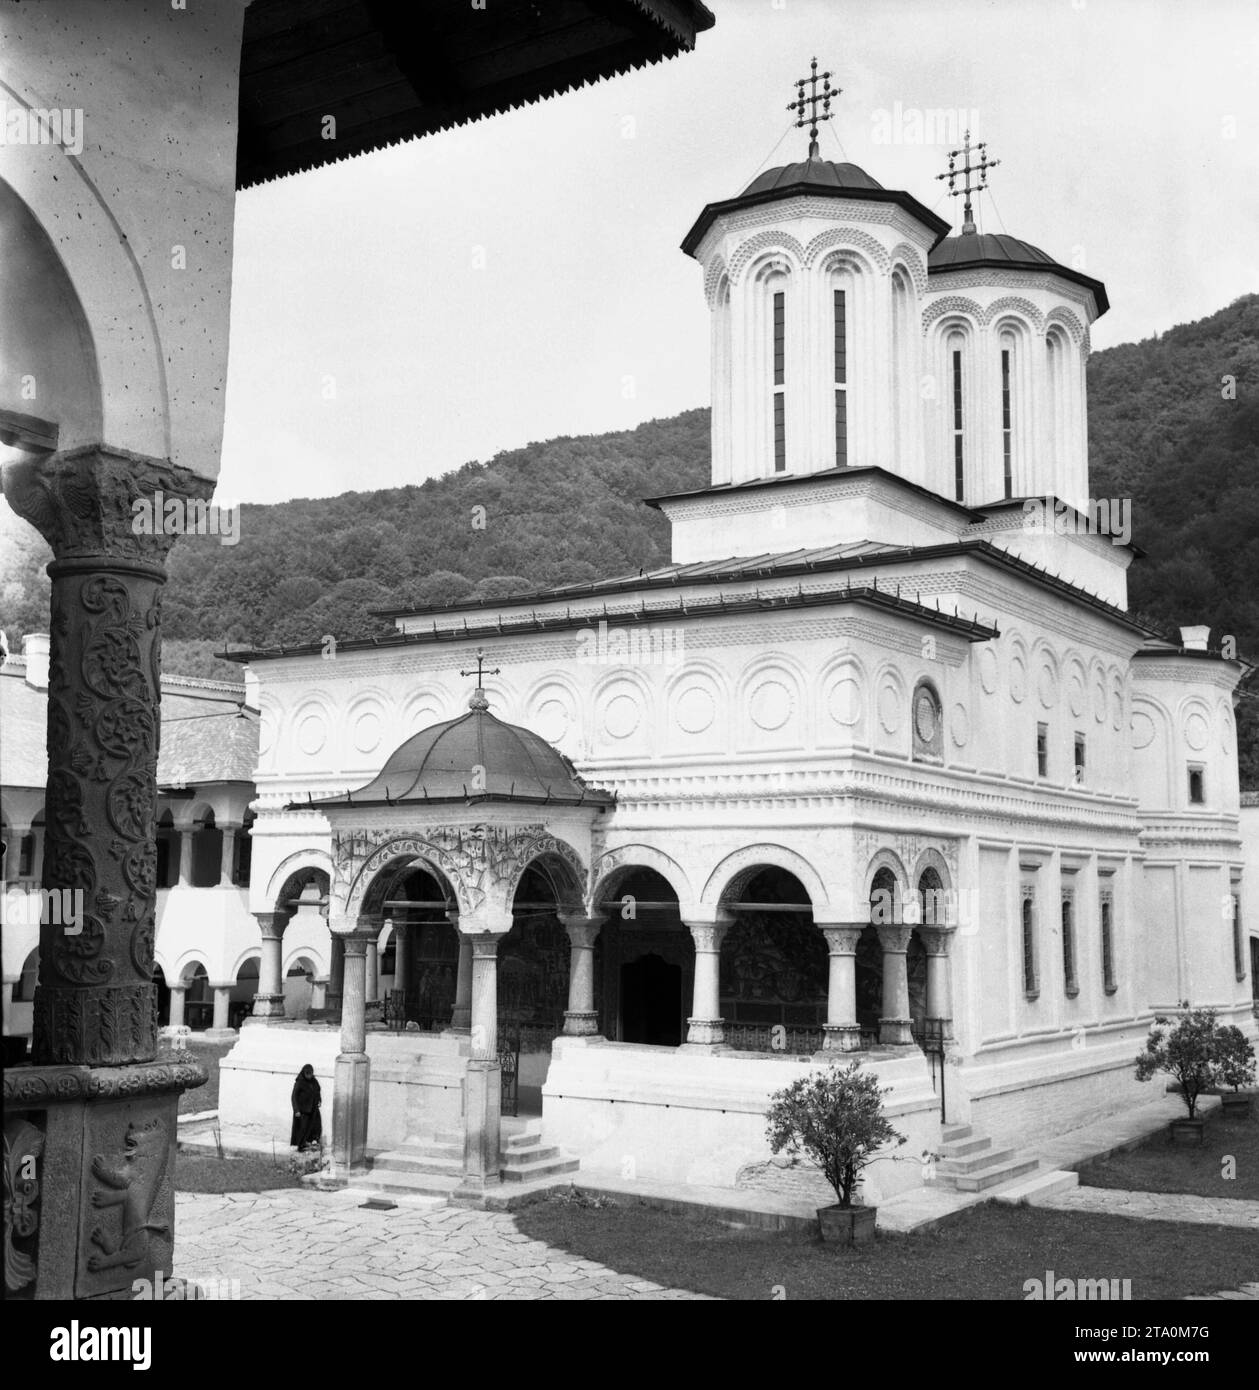 Valcea County, Romania. approx. 1980. Exterior view of Saints Constantine and Helena church at Horezu Monastery, a historical monument from the 17th century and inscribed by UNESCO on its list of World Heritage Sites. Stock Photo